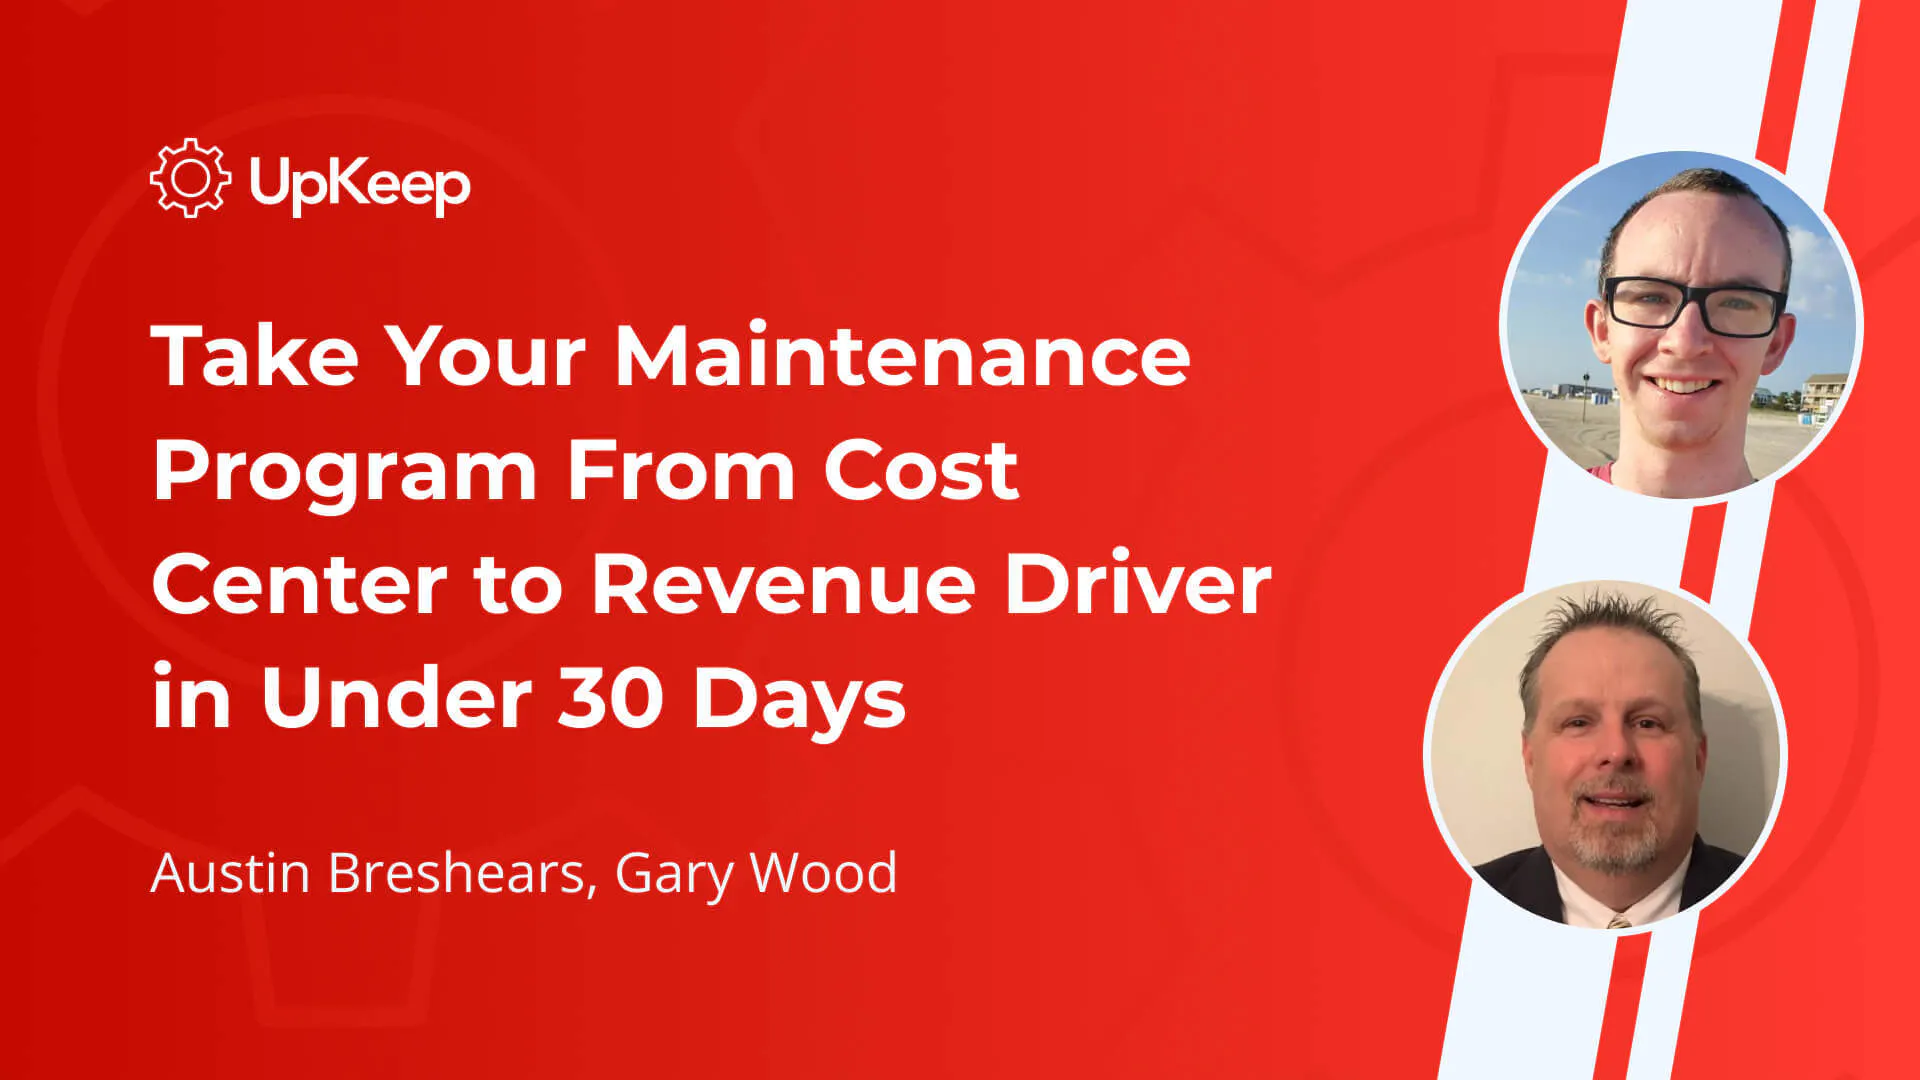 Take Your Maintenance Program From Cost Center to Revenue Driver in Under 30 Days